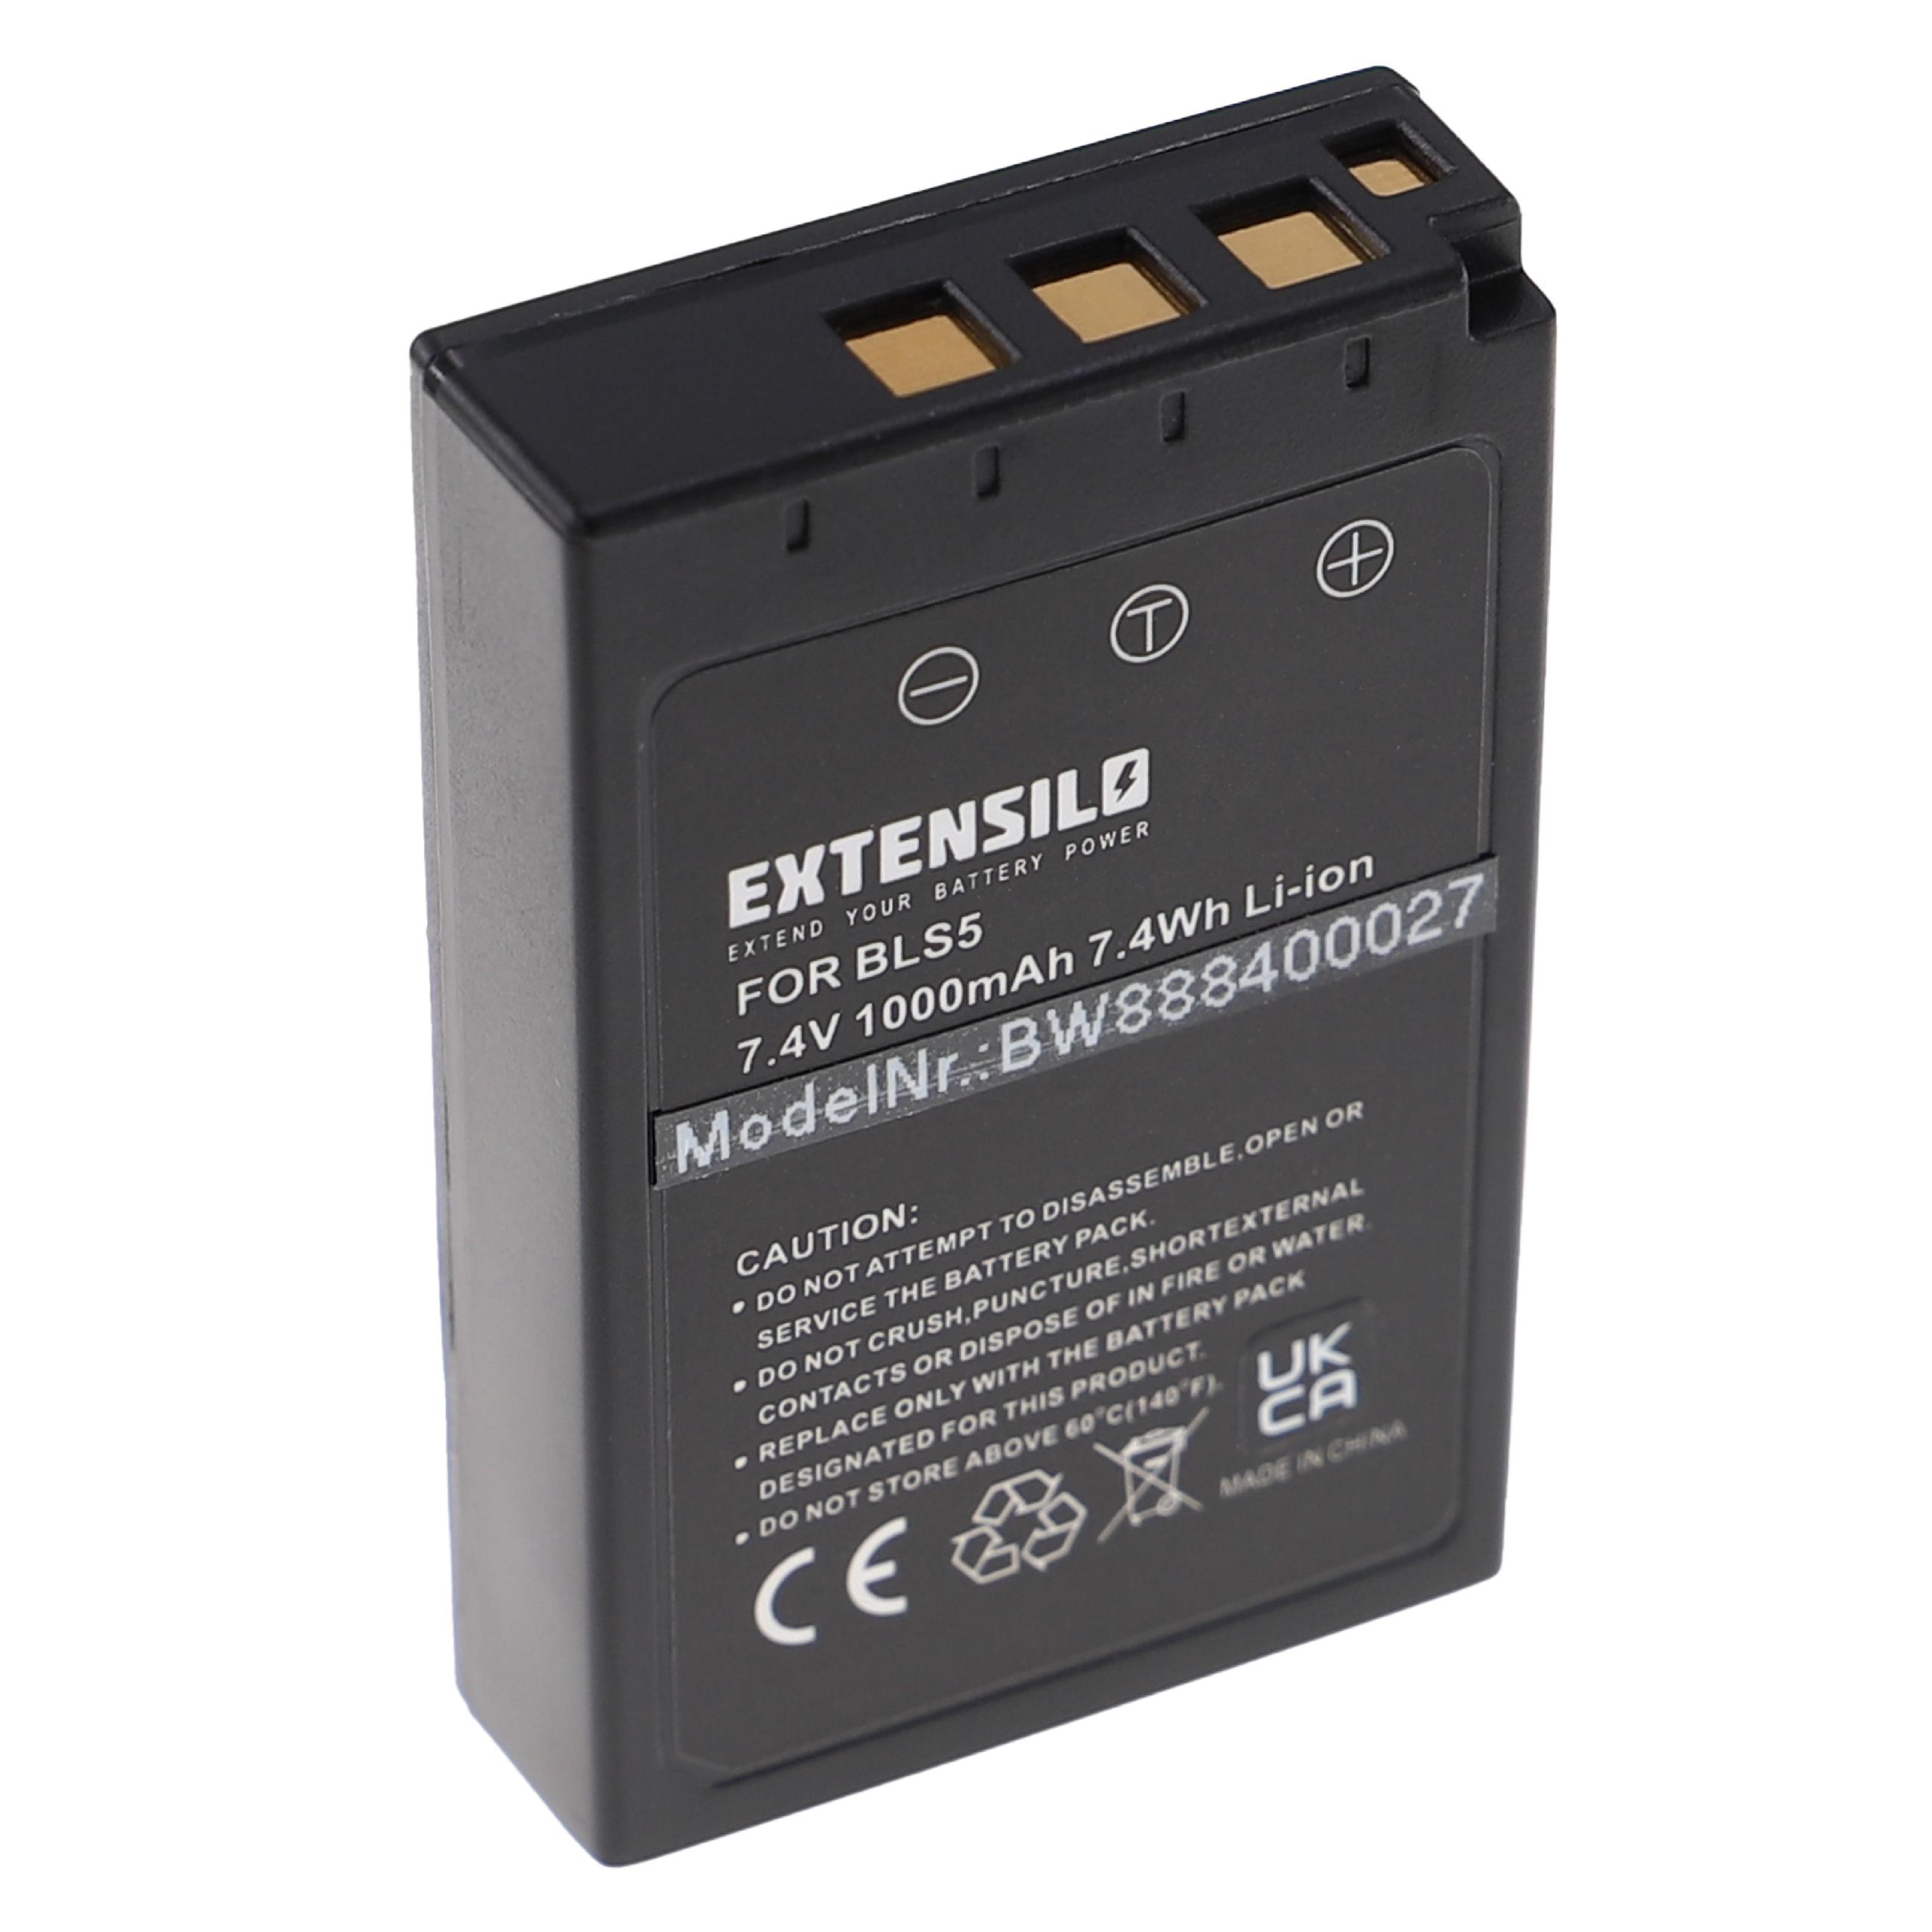 Battery Replacement for Olympus PS-BLS5, BLS50, BLS-5, BLS-50 - 1000mAh, 7.4V, Li-Ion with Info Chip